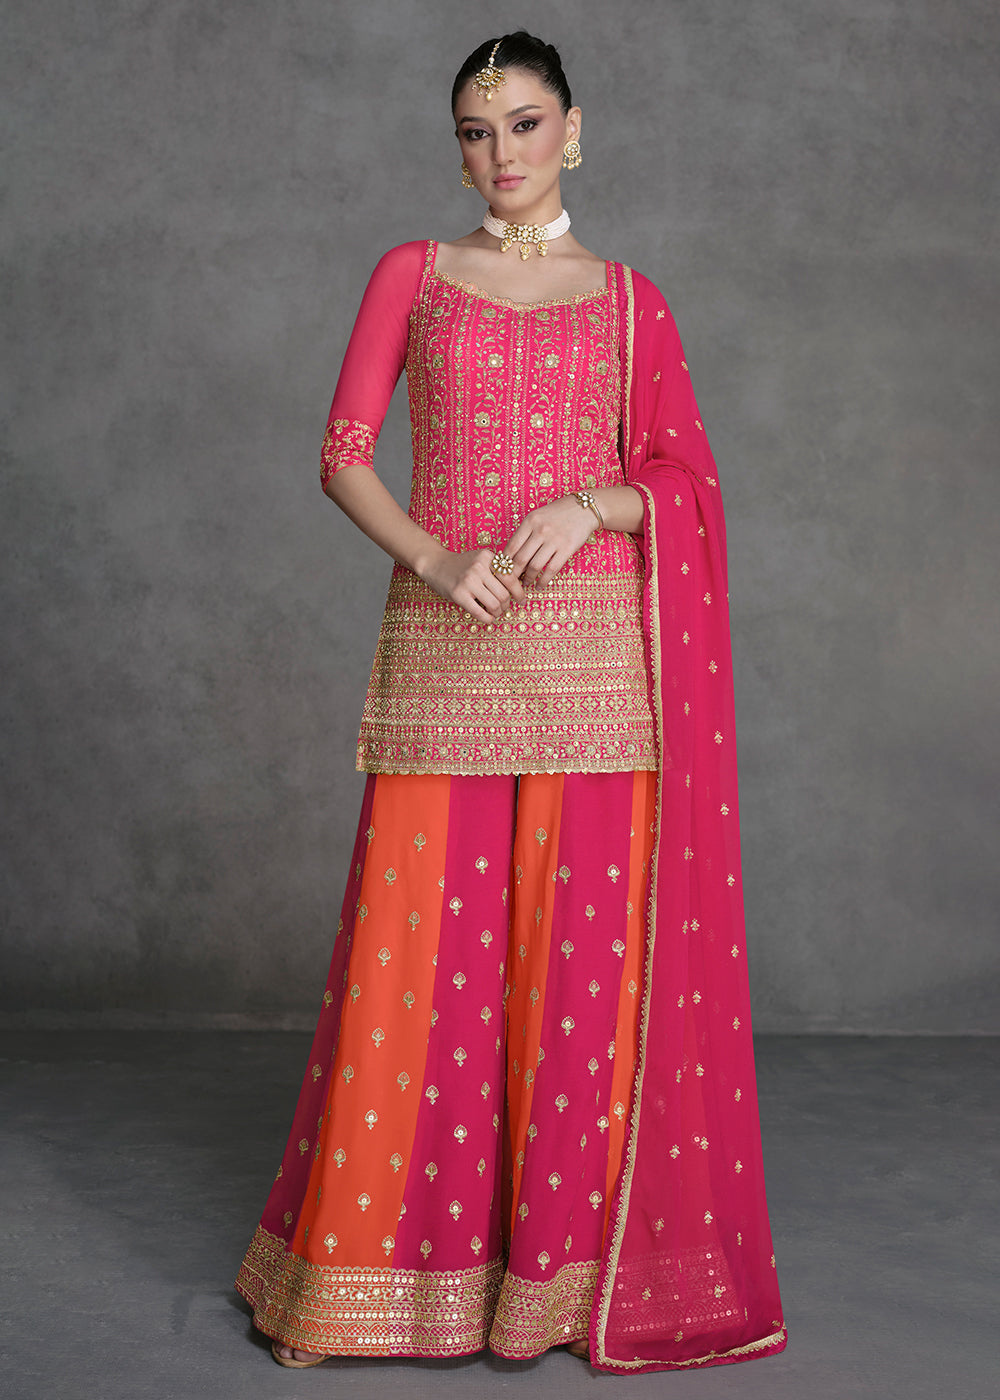 Shop Now Rani Pink Designer Style Wedding Wear Sharara Suit Online at Empress Clothing in USA, UK, Canada, Italy & Worldwide.